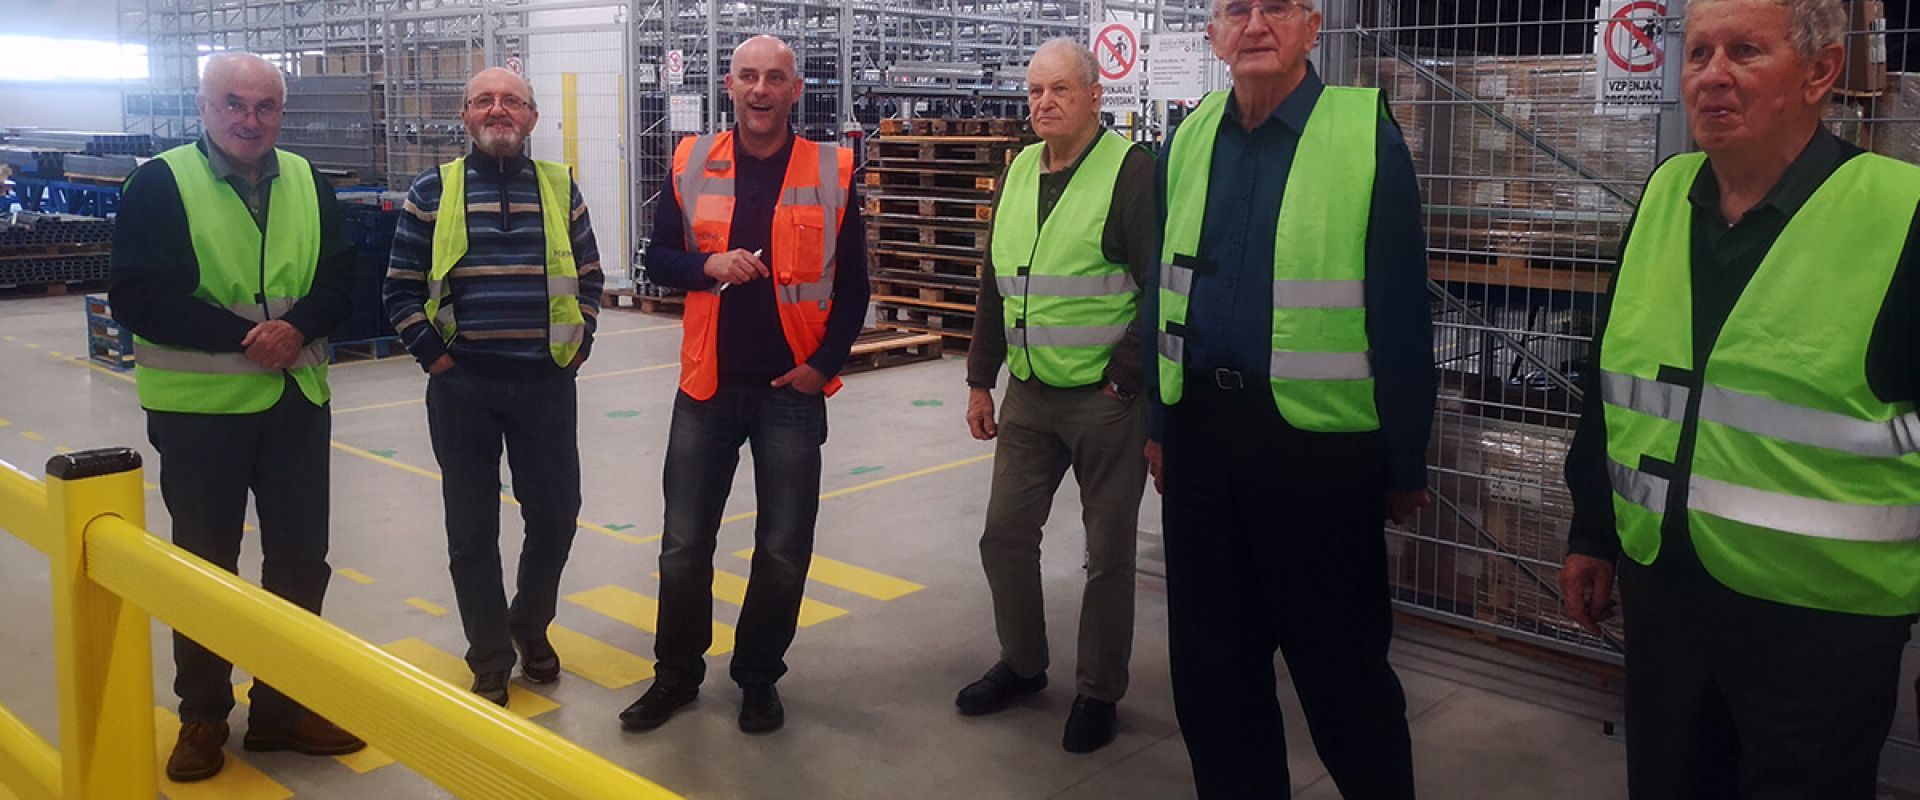 Herman Rauter, the founder of the company Hermi, visited the new production facility